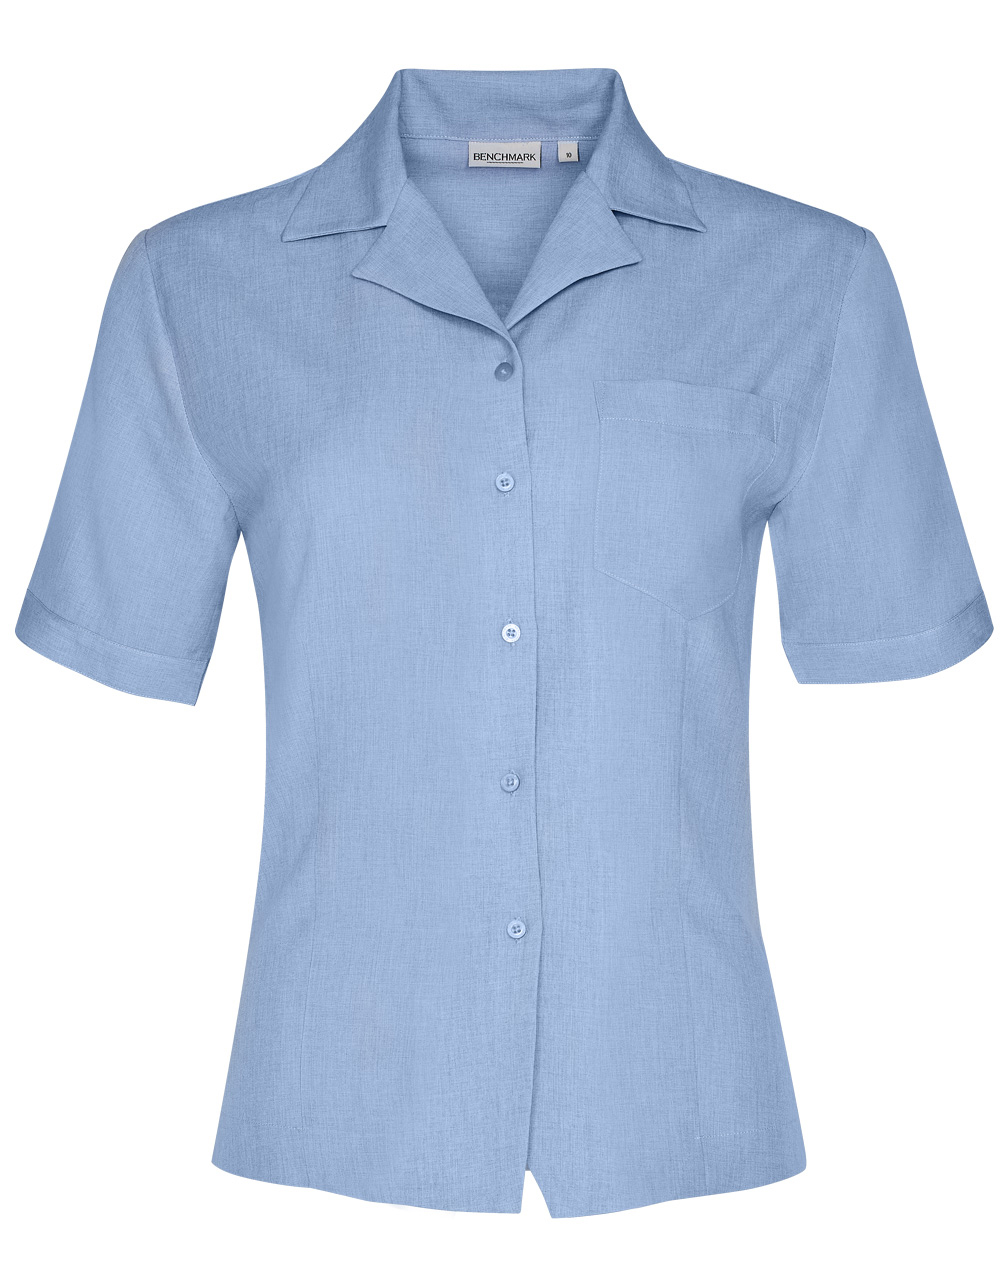 M8614S Women’s CoolDry Short Sleeve Overblouse